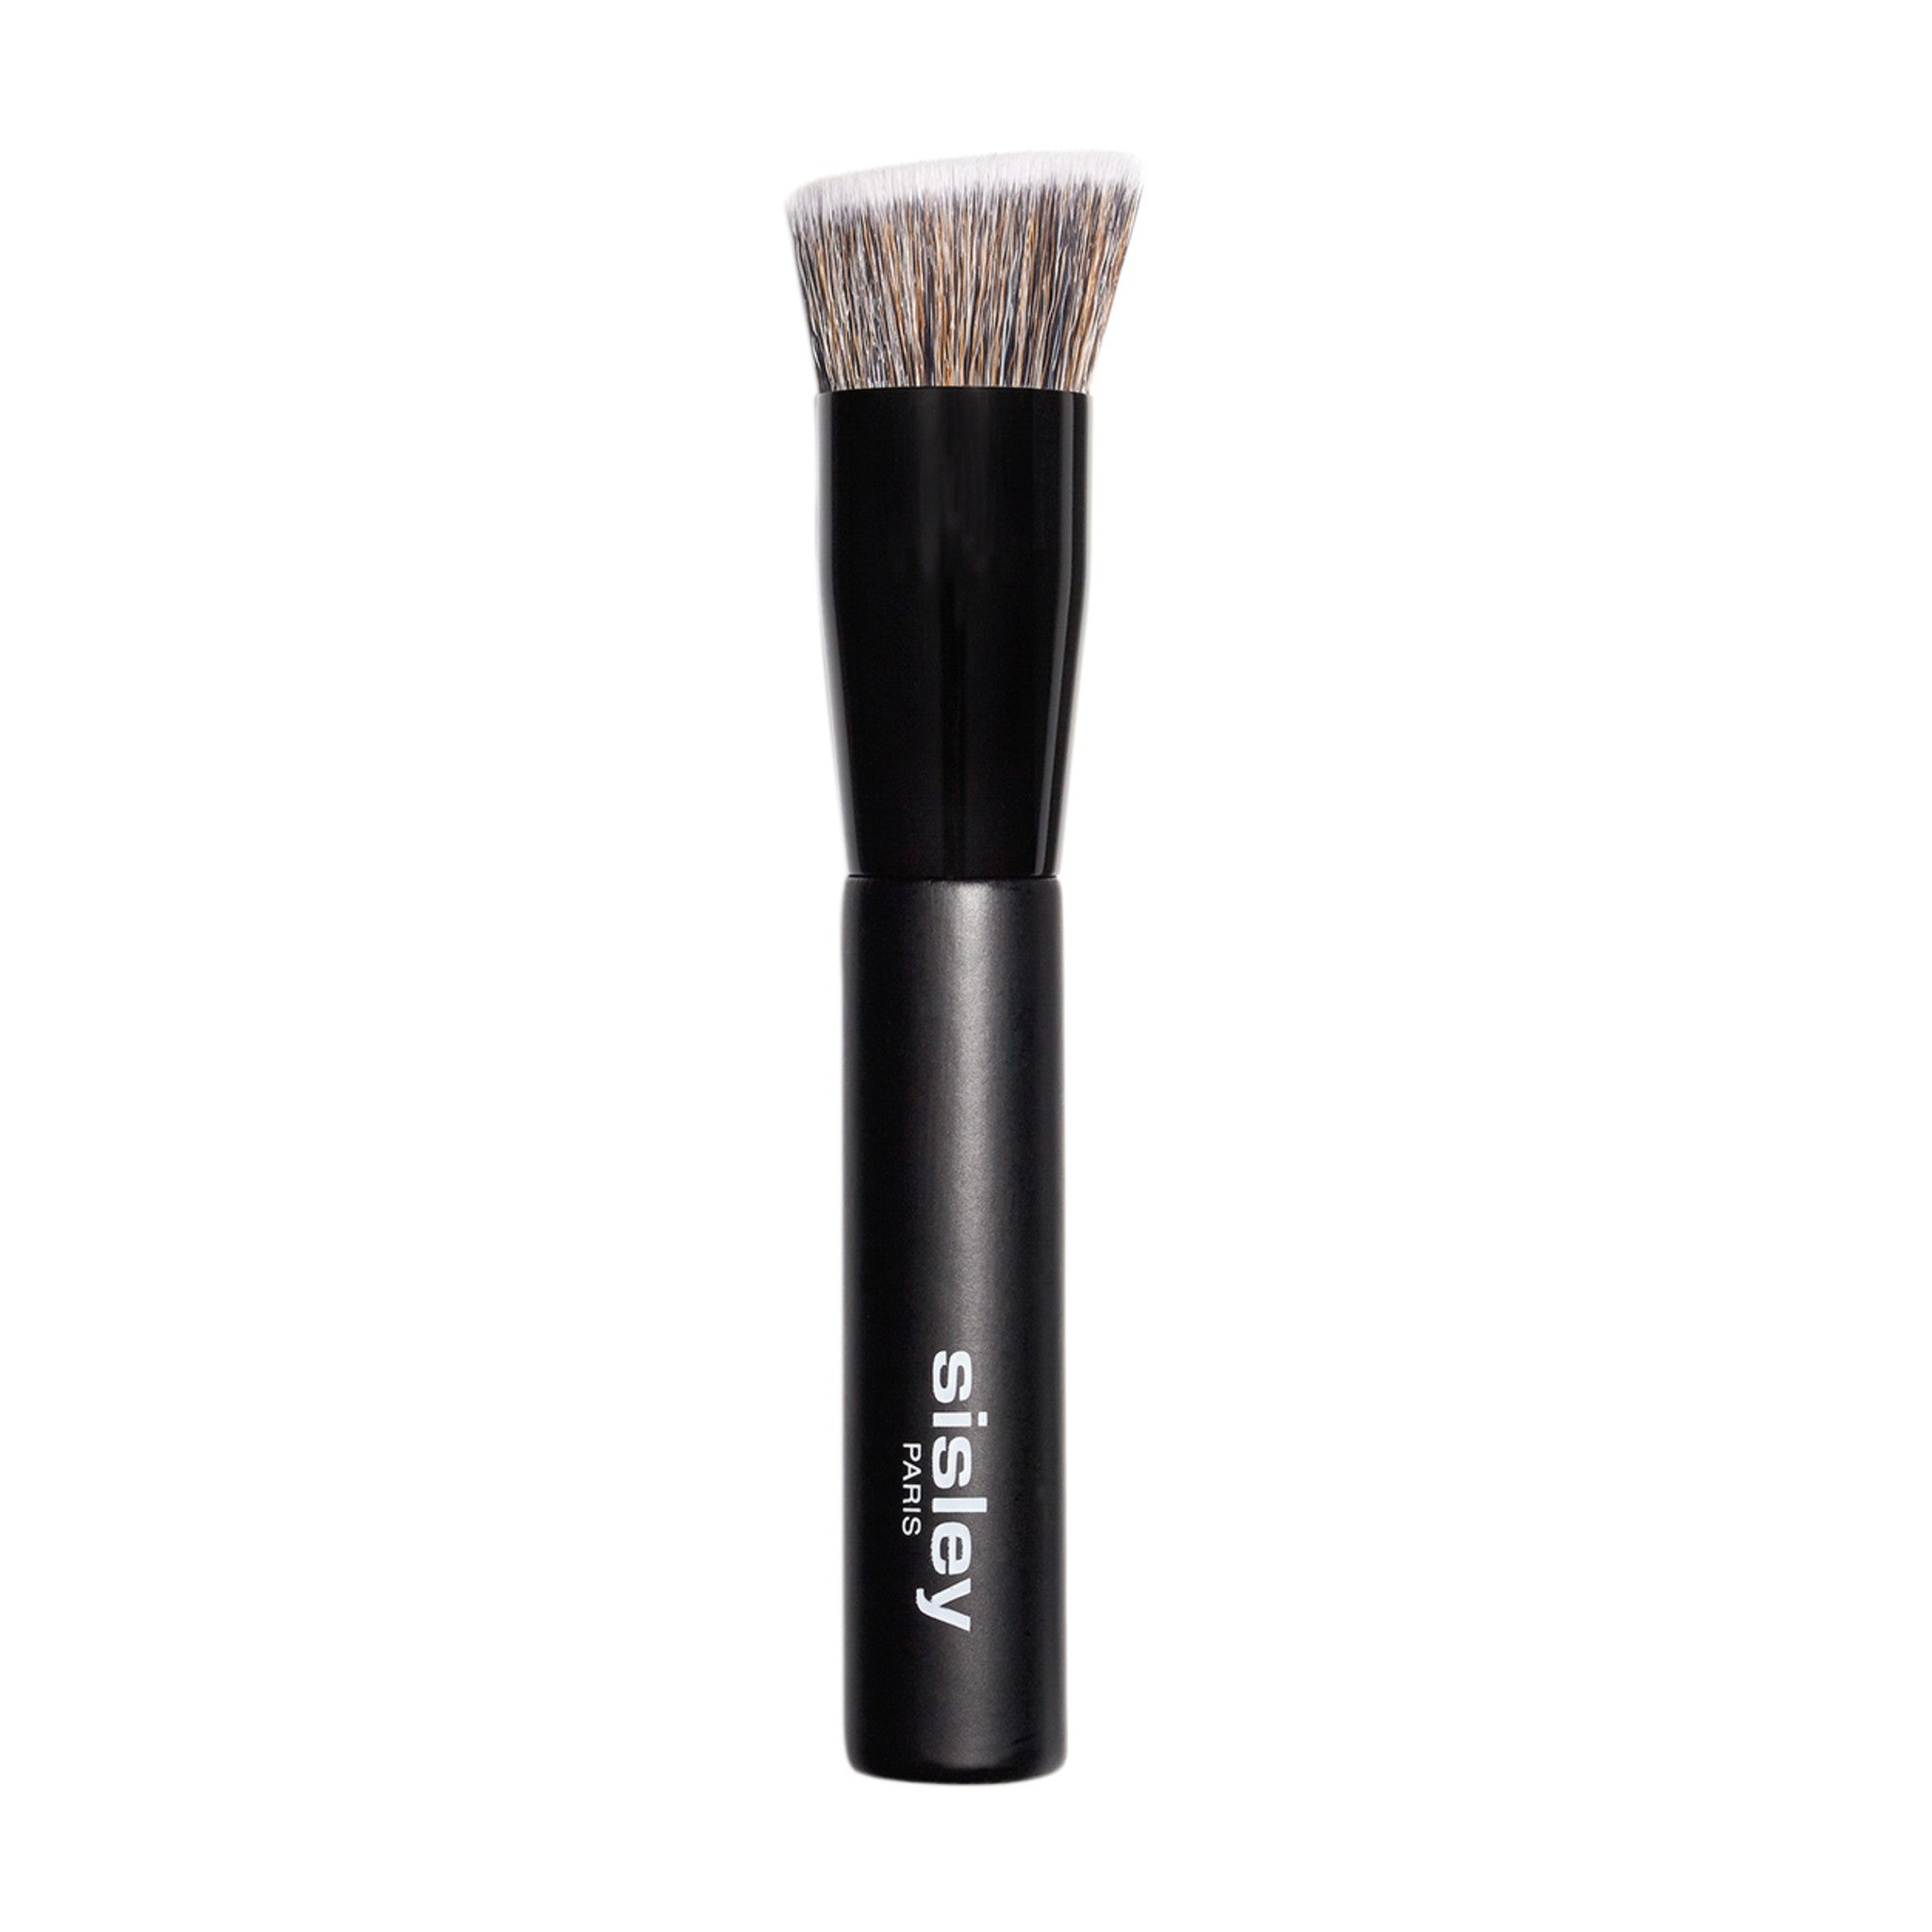 Best Face Makeup Brushes Guide: Types Of Makeup Brushes